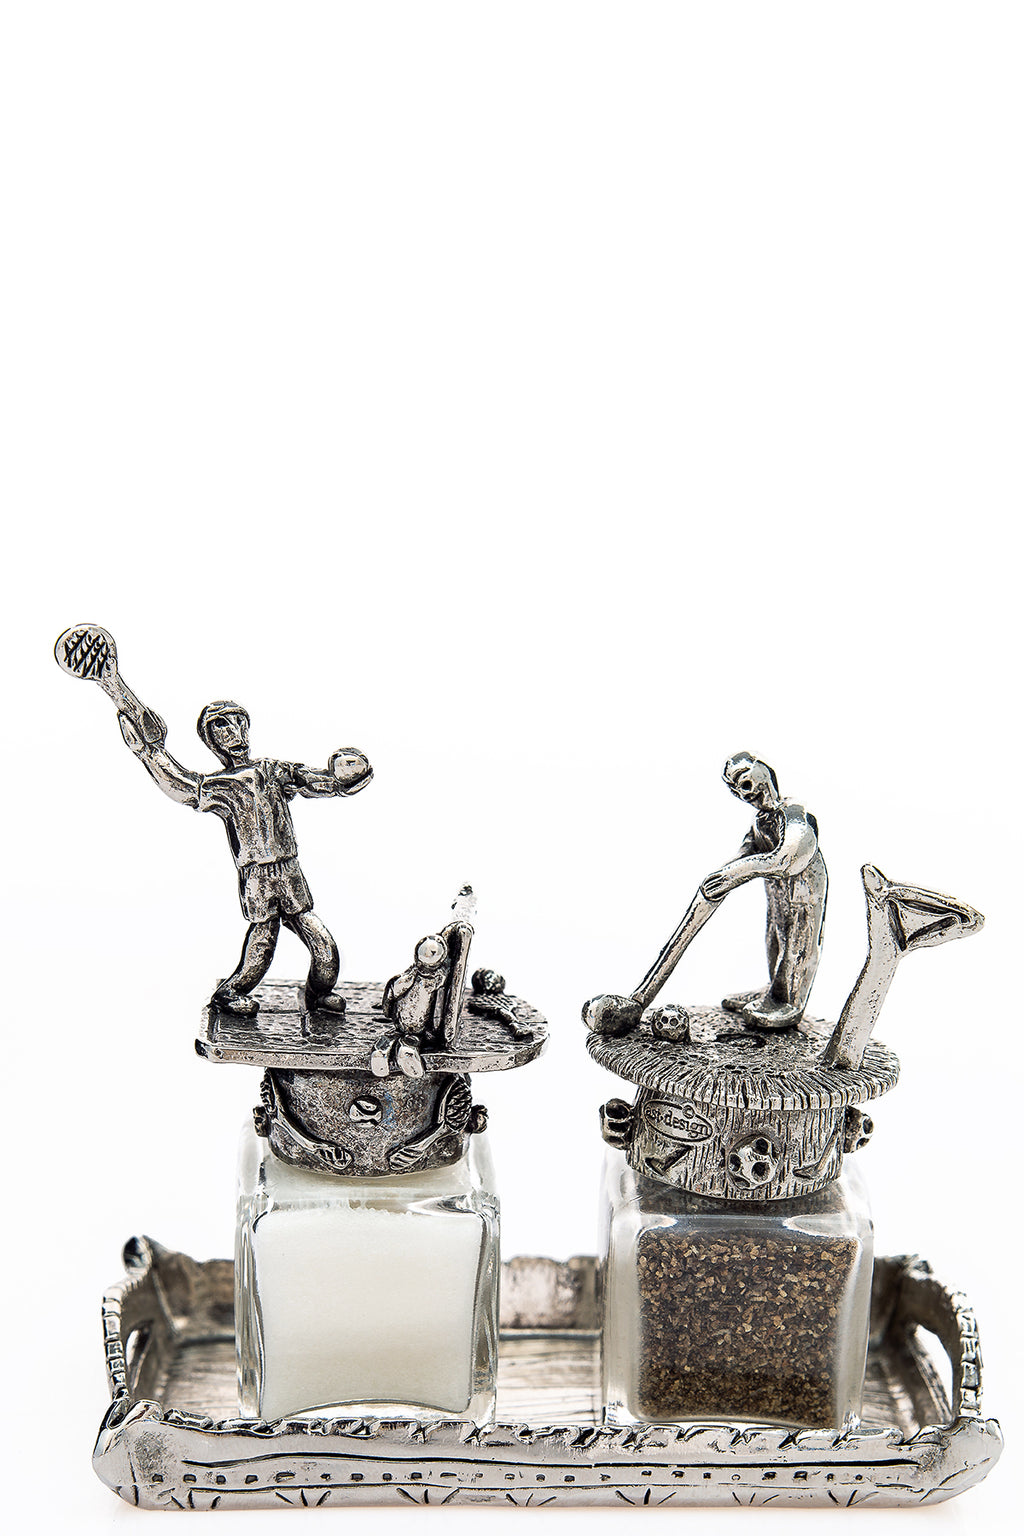 Tall Salt And Pepper Shakers – Thomas Leiblein